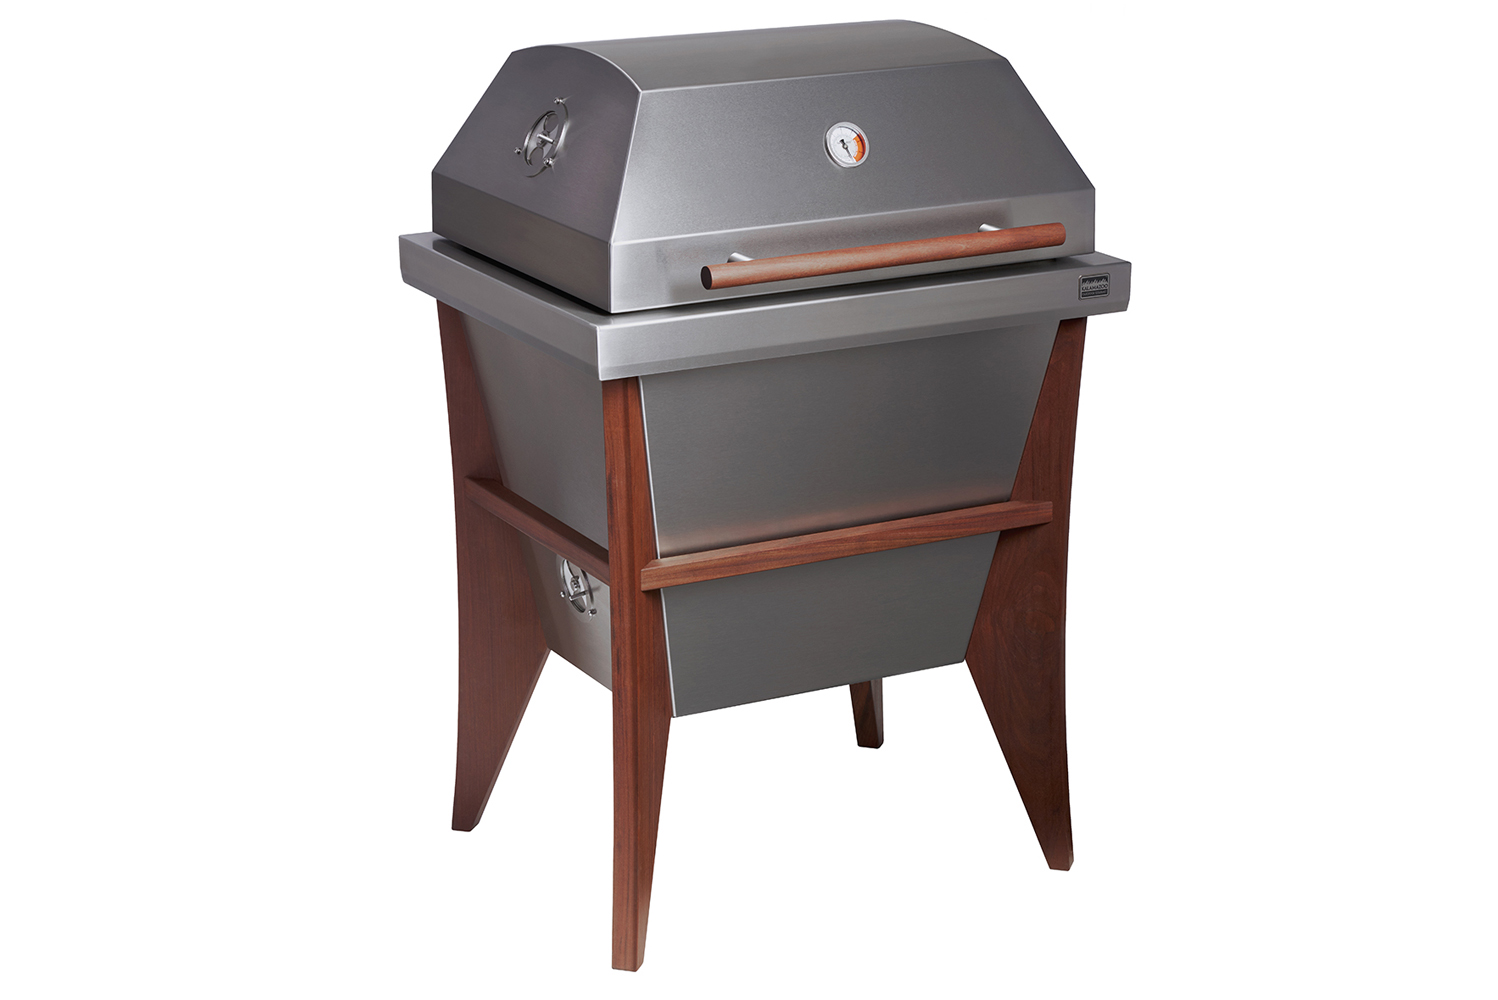 This is the first completely new grill design from the company since it introduced the Gaucho Grill in 2014